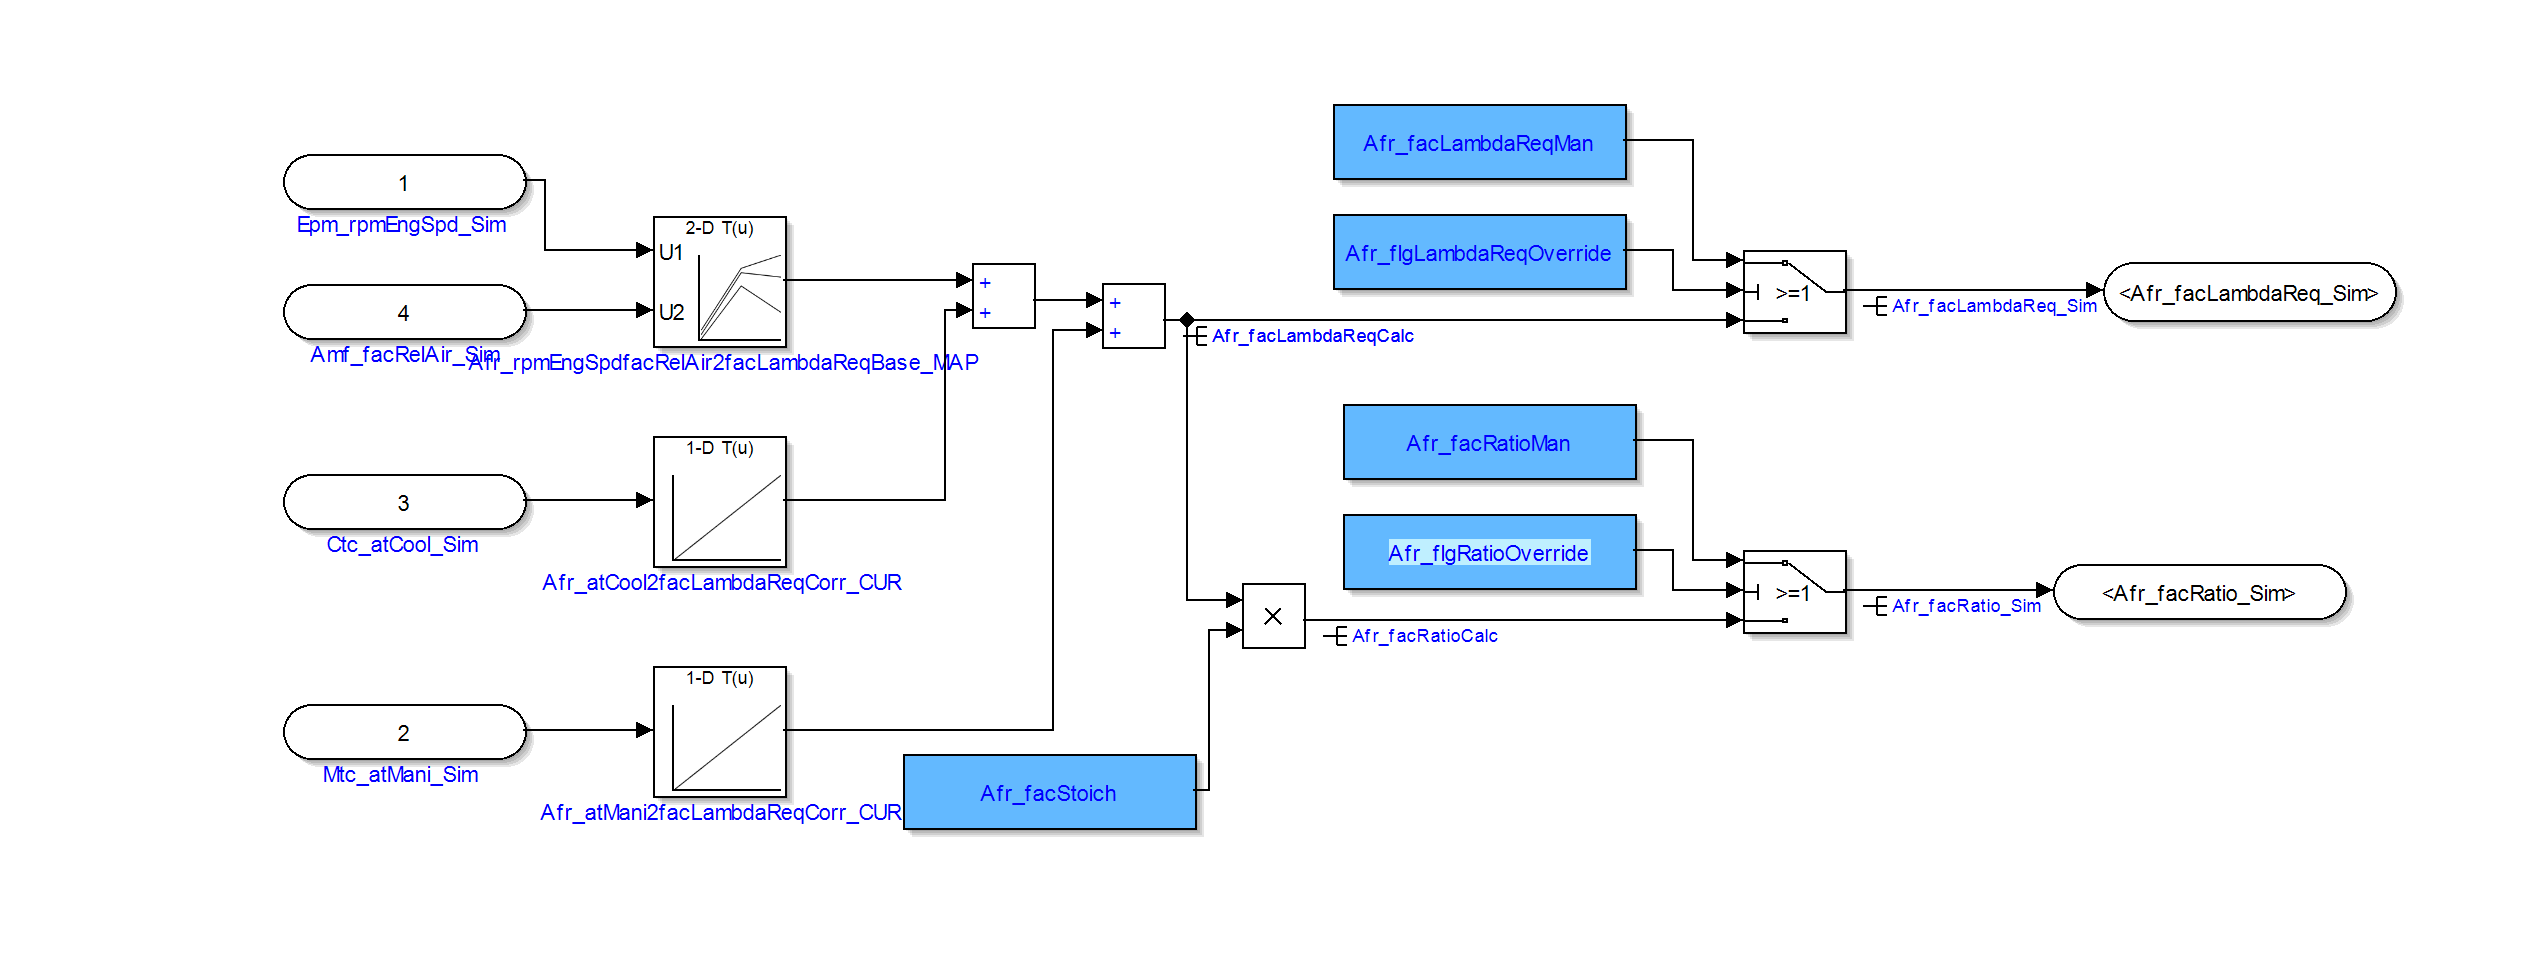 Algorithm Specification in the form of an Simulink model